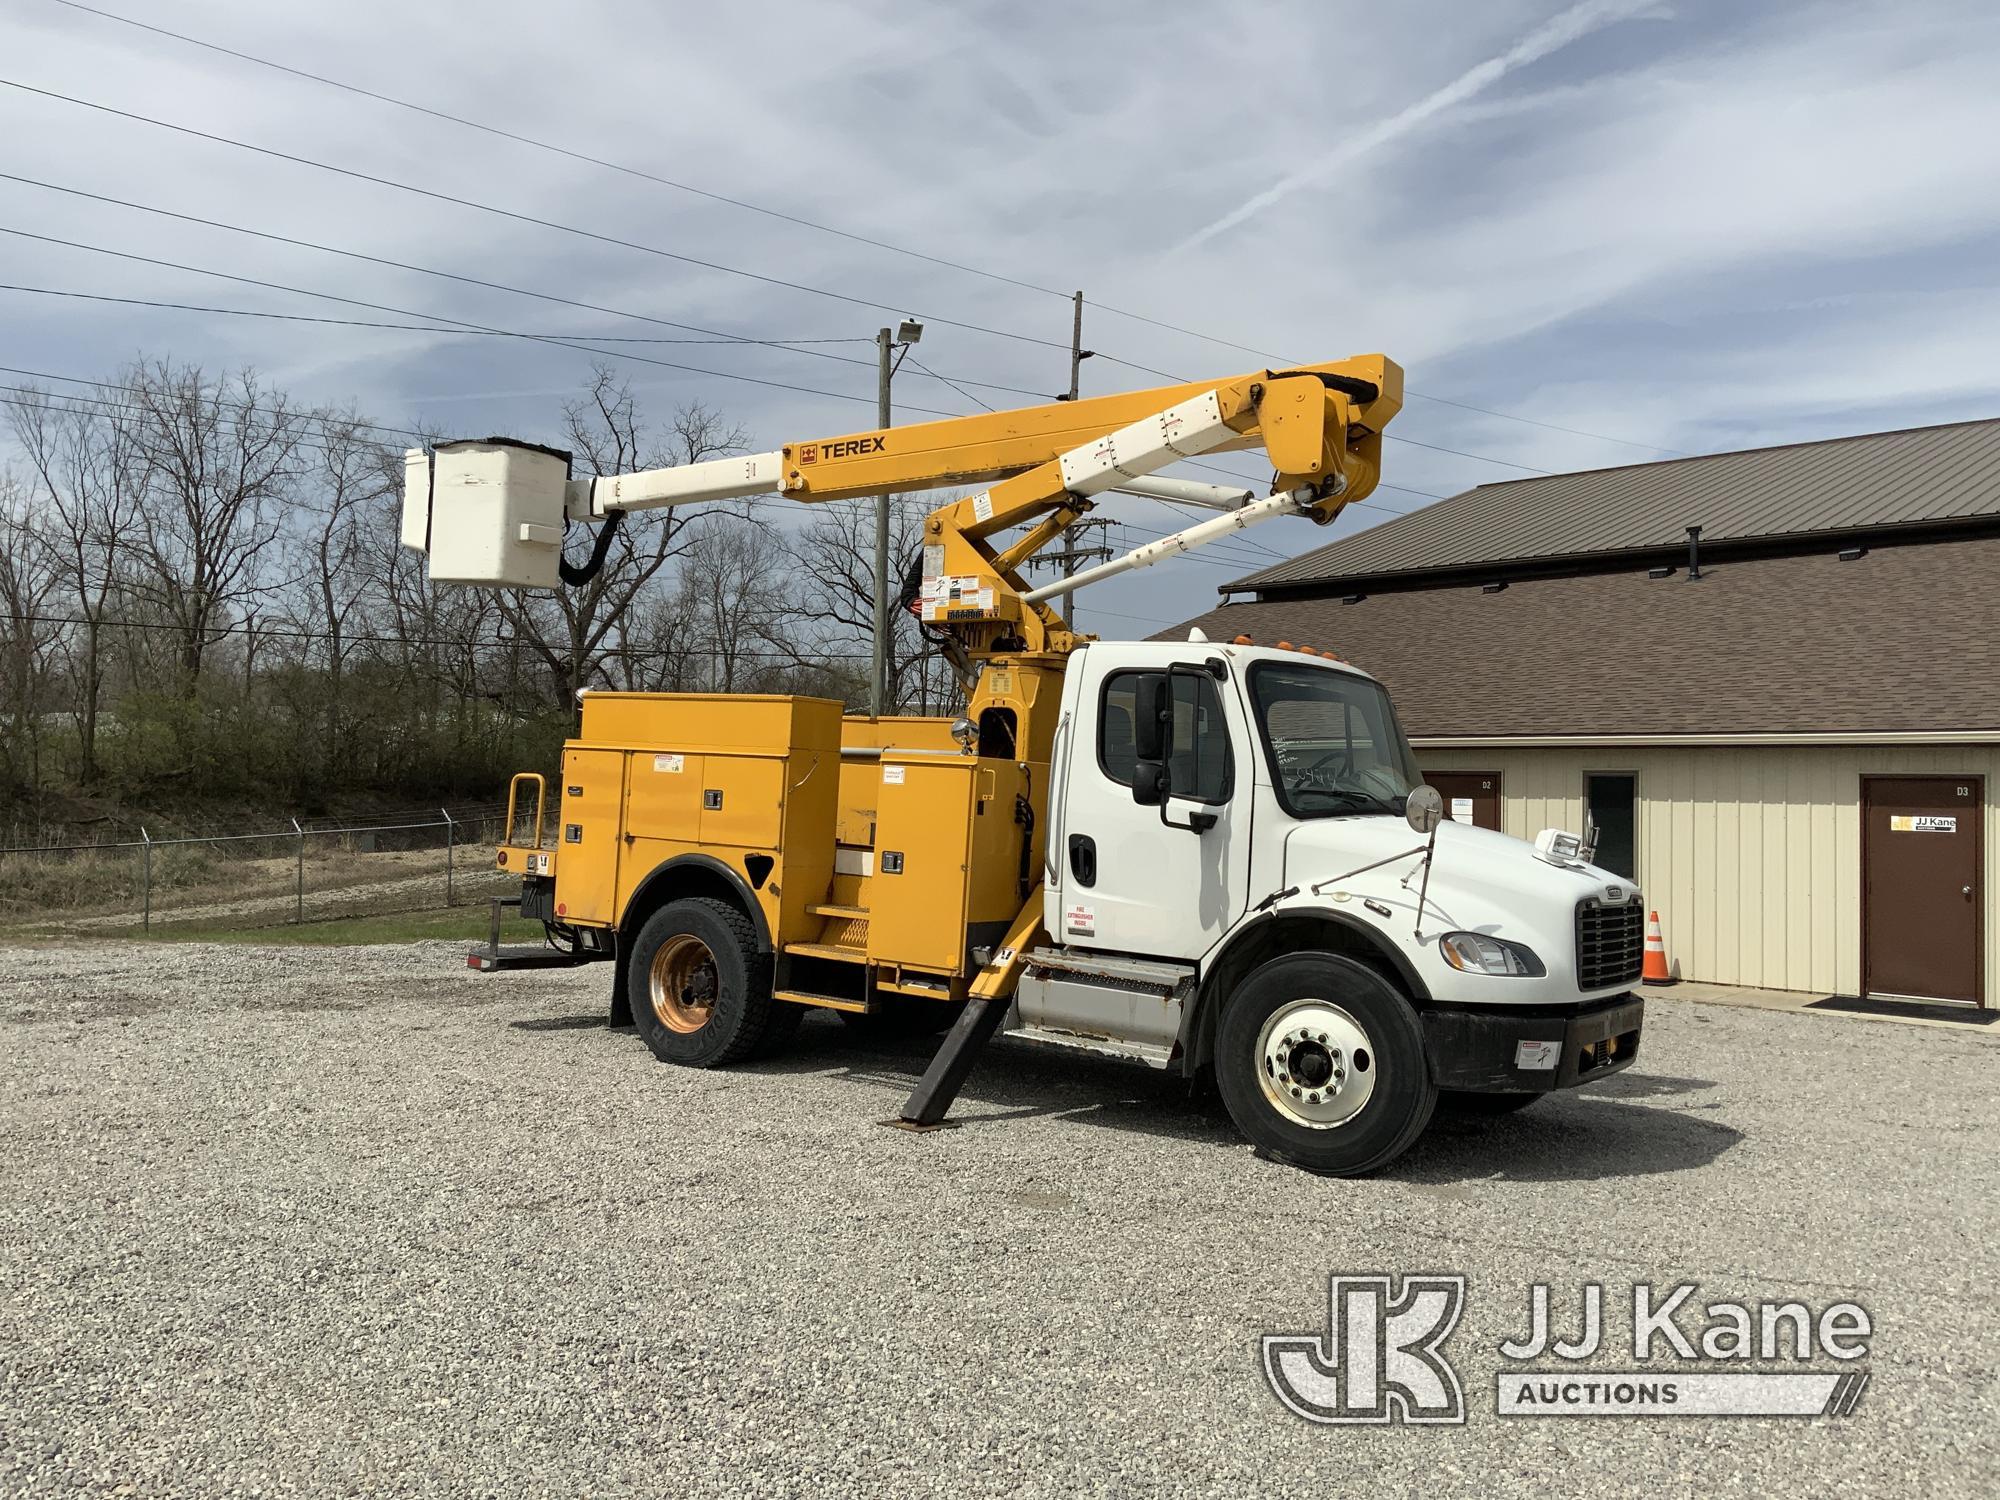 (Fort Wayne, IN) HiRanger TL41-MH, Material Handling Bucket Truck mounted behind cab on 2011 Freight